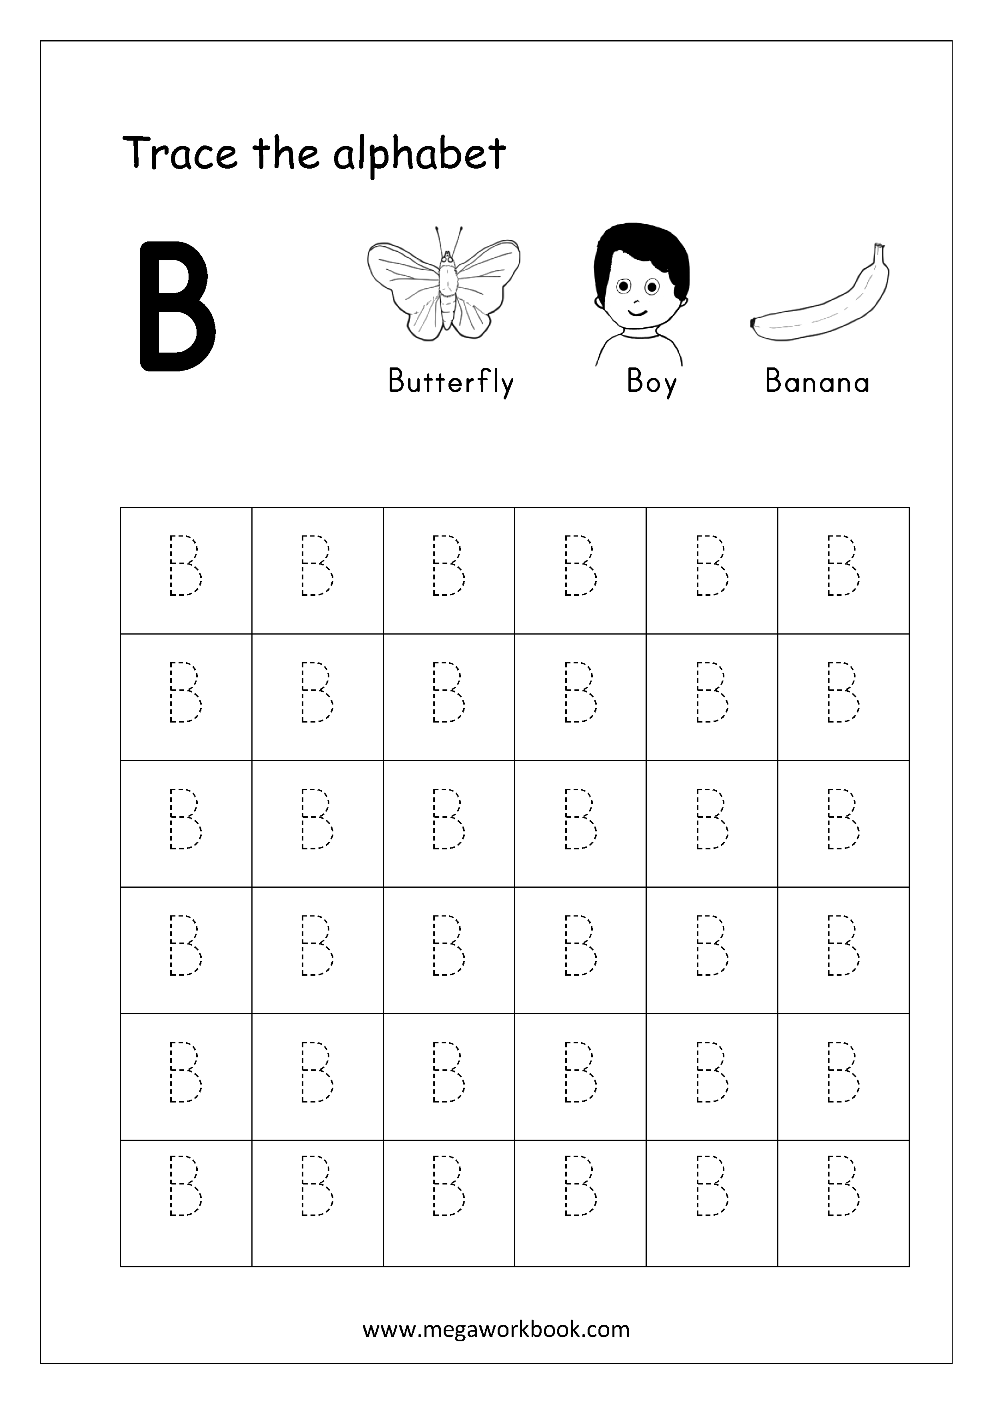 tracing-letters-alphabet-tracing-capital-letters-letter-tracing-letter-b-activities-letter-b